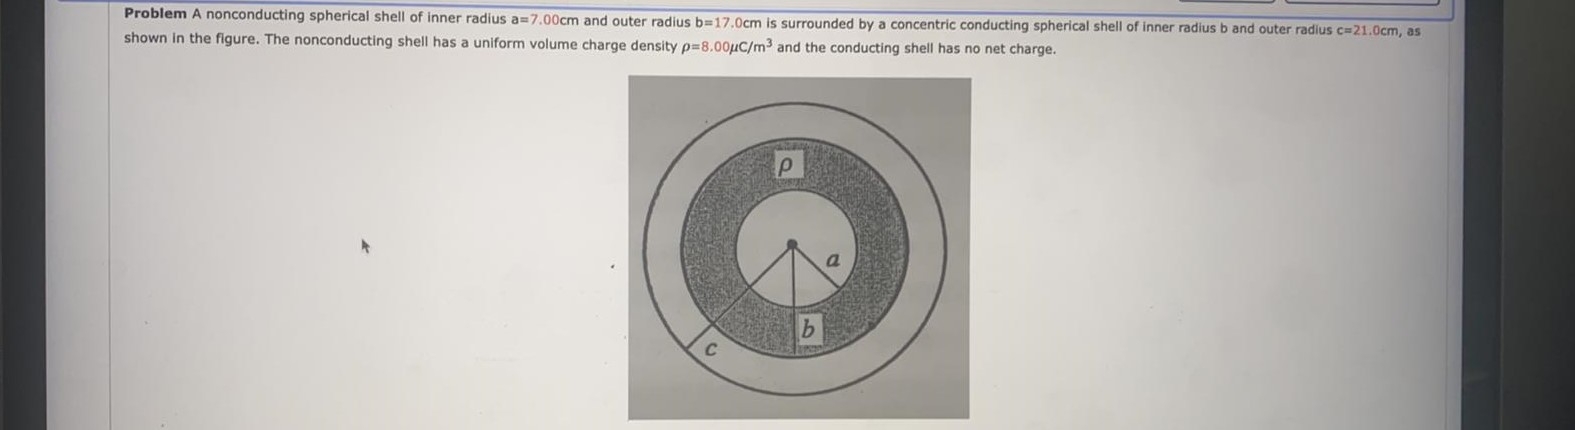 Problem A nonconducting spherical shell of inner radius a=7.00cm and outer radius b=17.0cm is surrounded by a concentric conducting spherical shell of inner radius b and outer radius c=21.0cm, as
shown in the figure. The nonconducting shell has a uniform volume charge density p-8.00µC/m3 and the conducting shell has no net charge.
C
